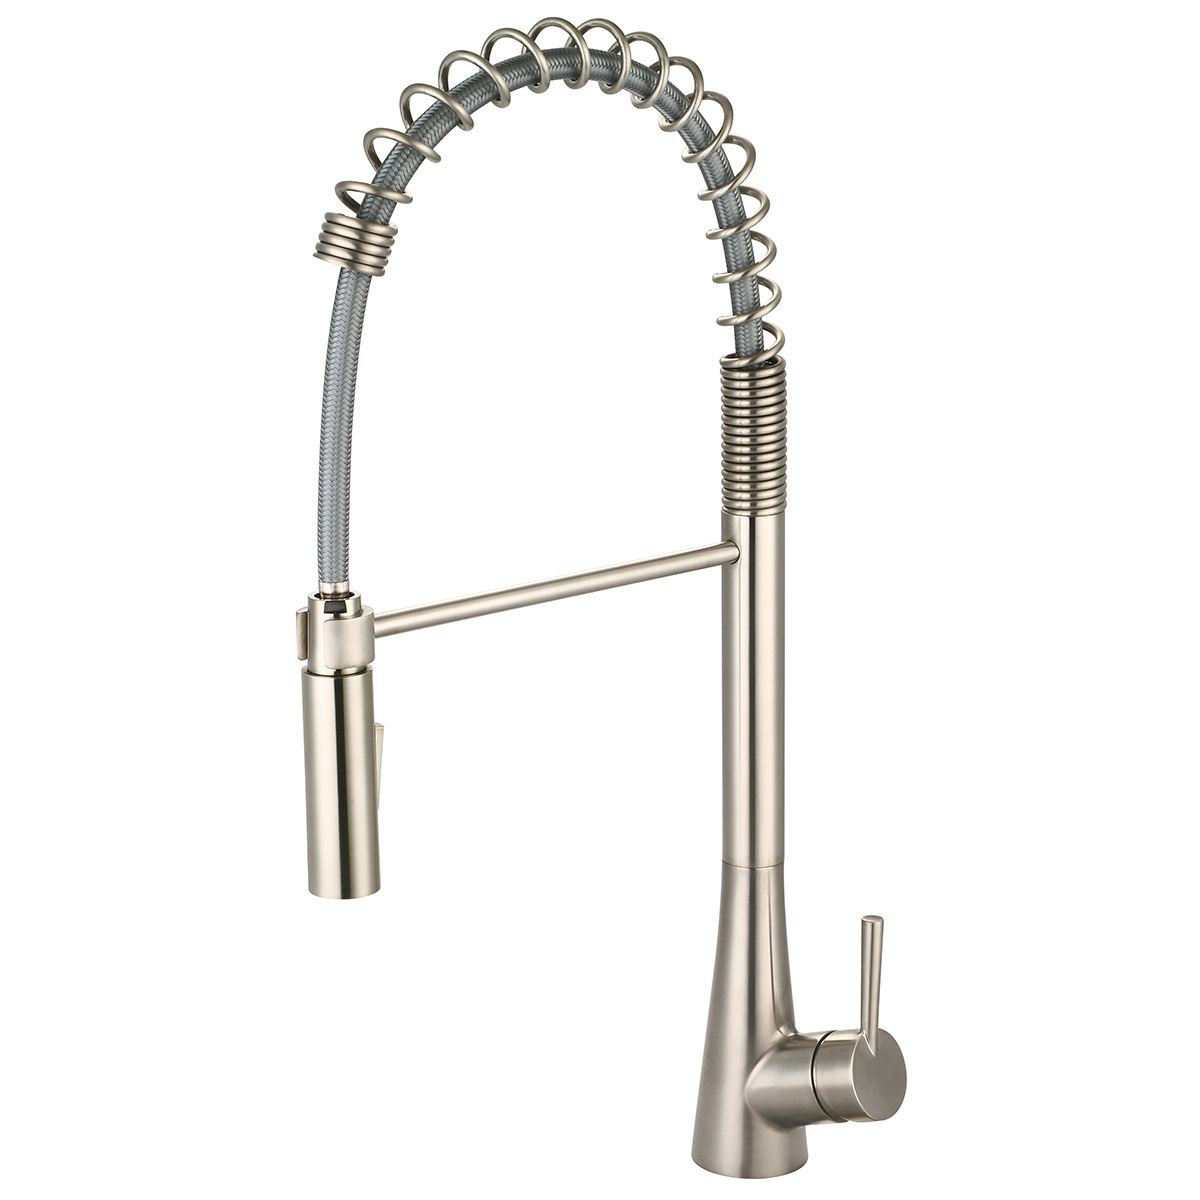 I2 K-5015-bn 7.62 In. Single Handle Pre-rinse Spring Pull-down Kitchen Faucet - Brushed Nickel